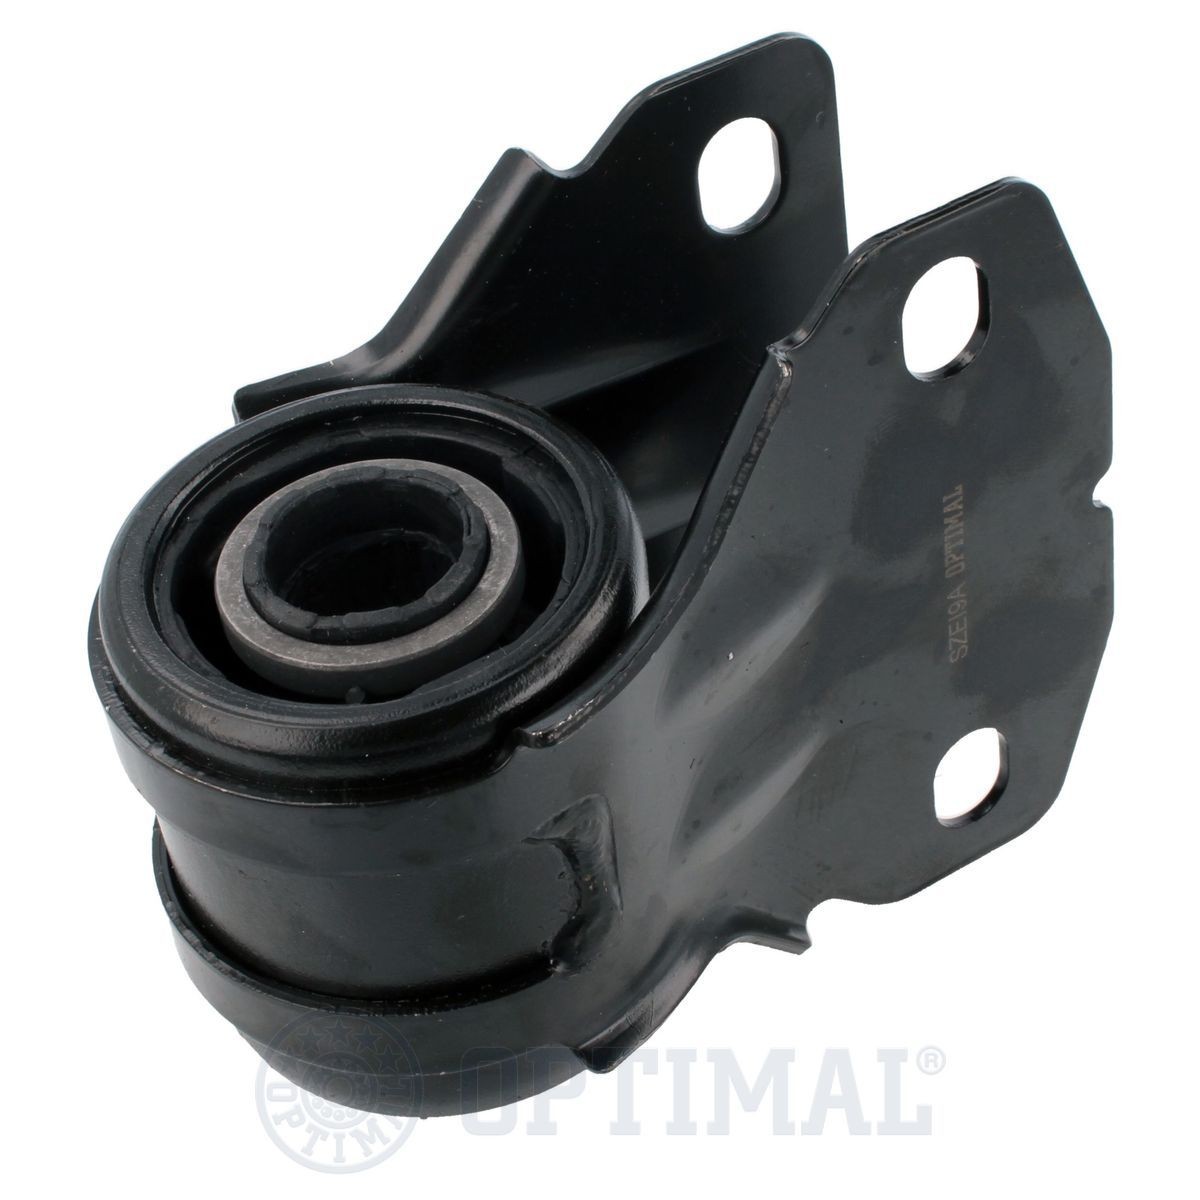 OPTIMAL with holder, Front Axle Right, Rear, Lower, 87mm, Hydro Mount, for control arm Arm Bush F9-0118 buy